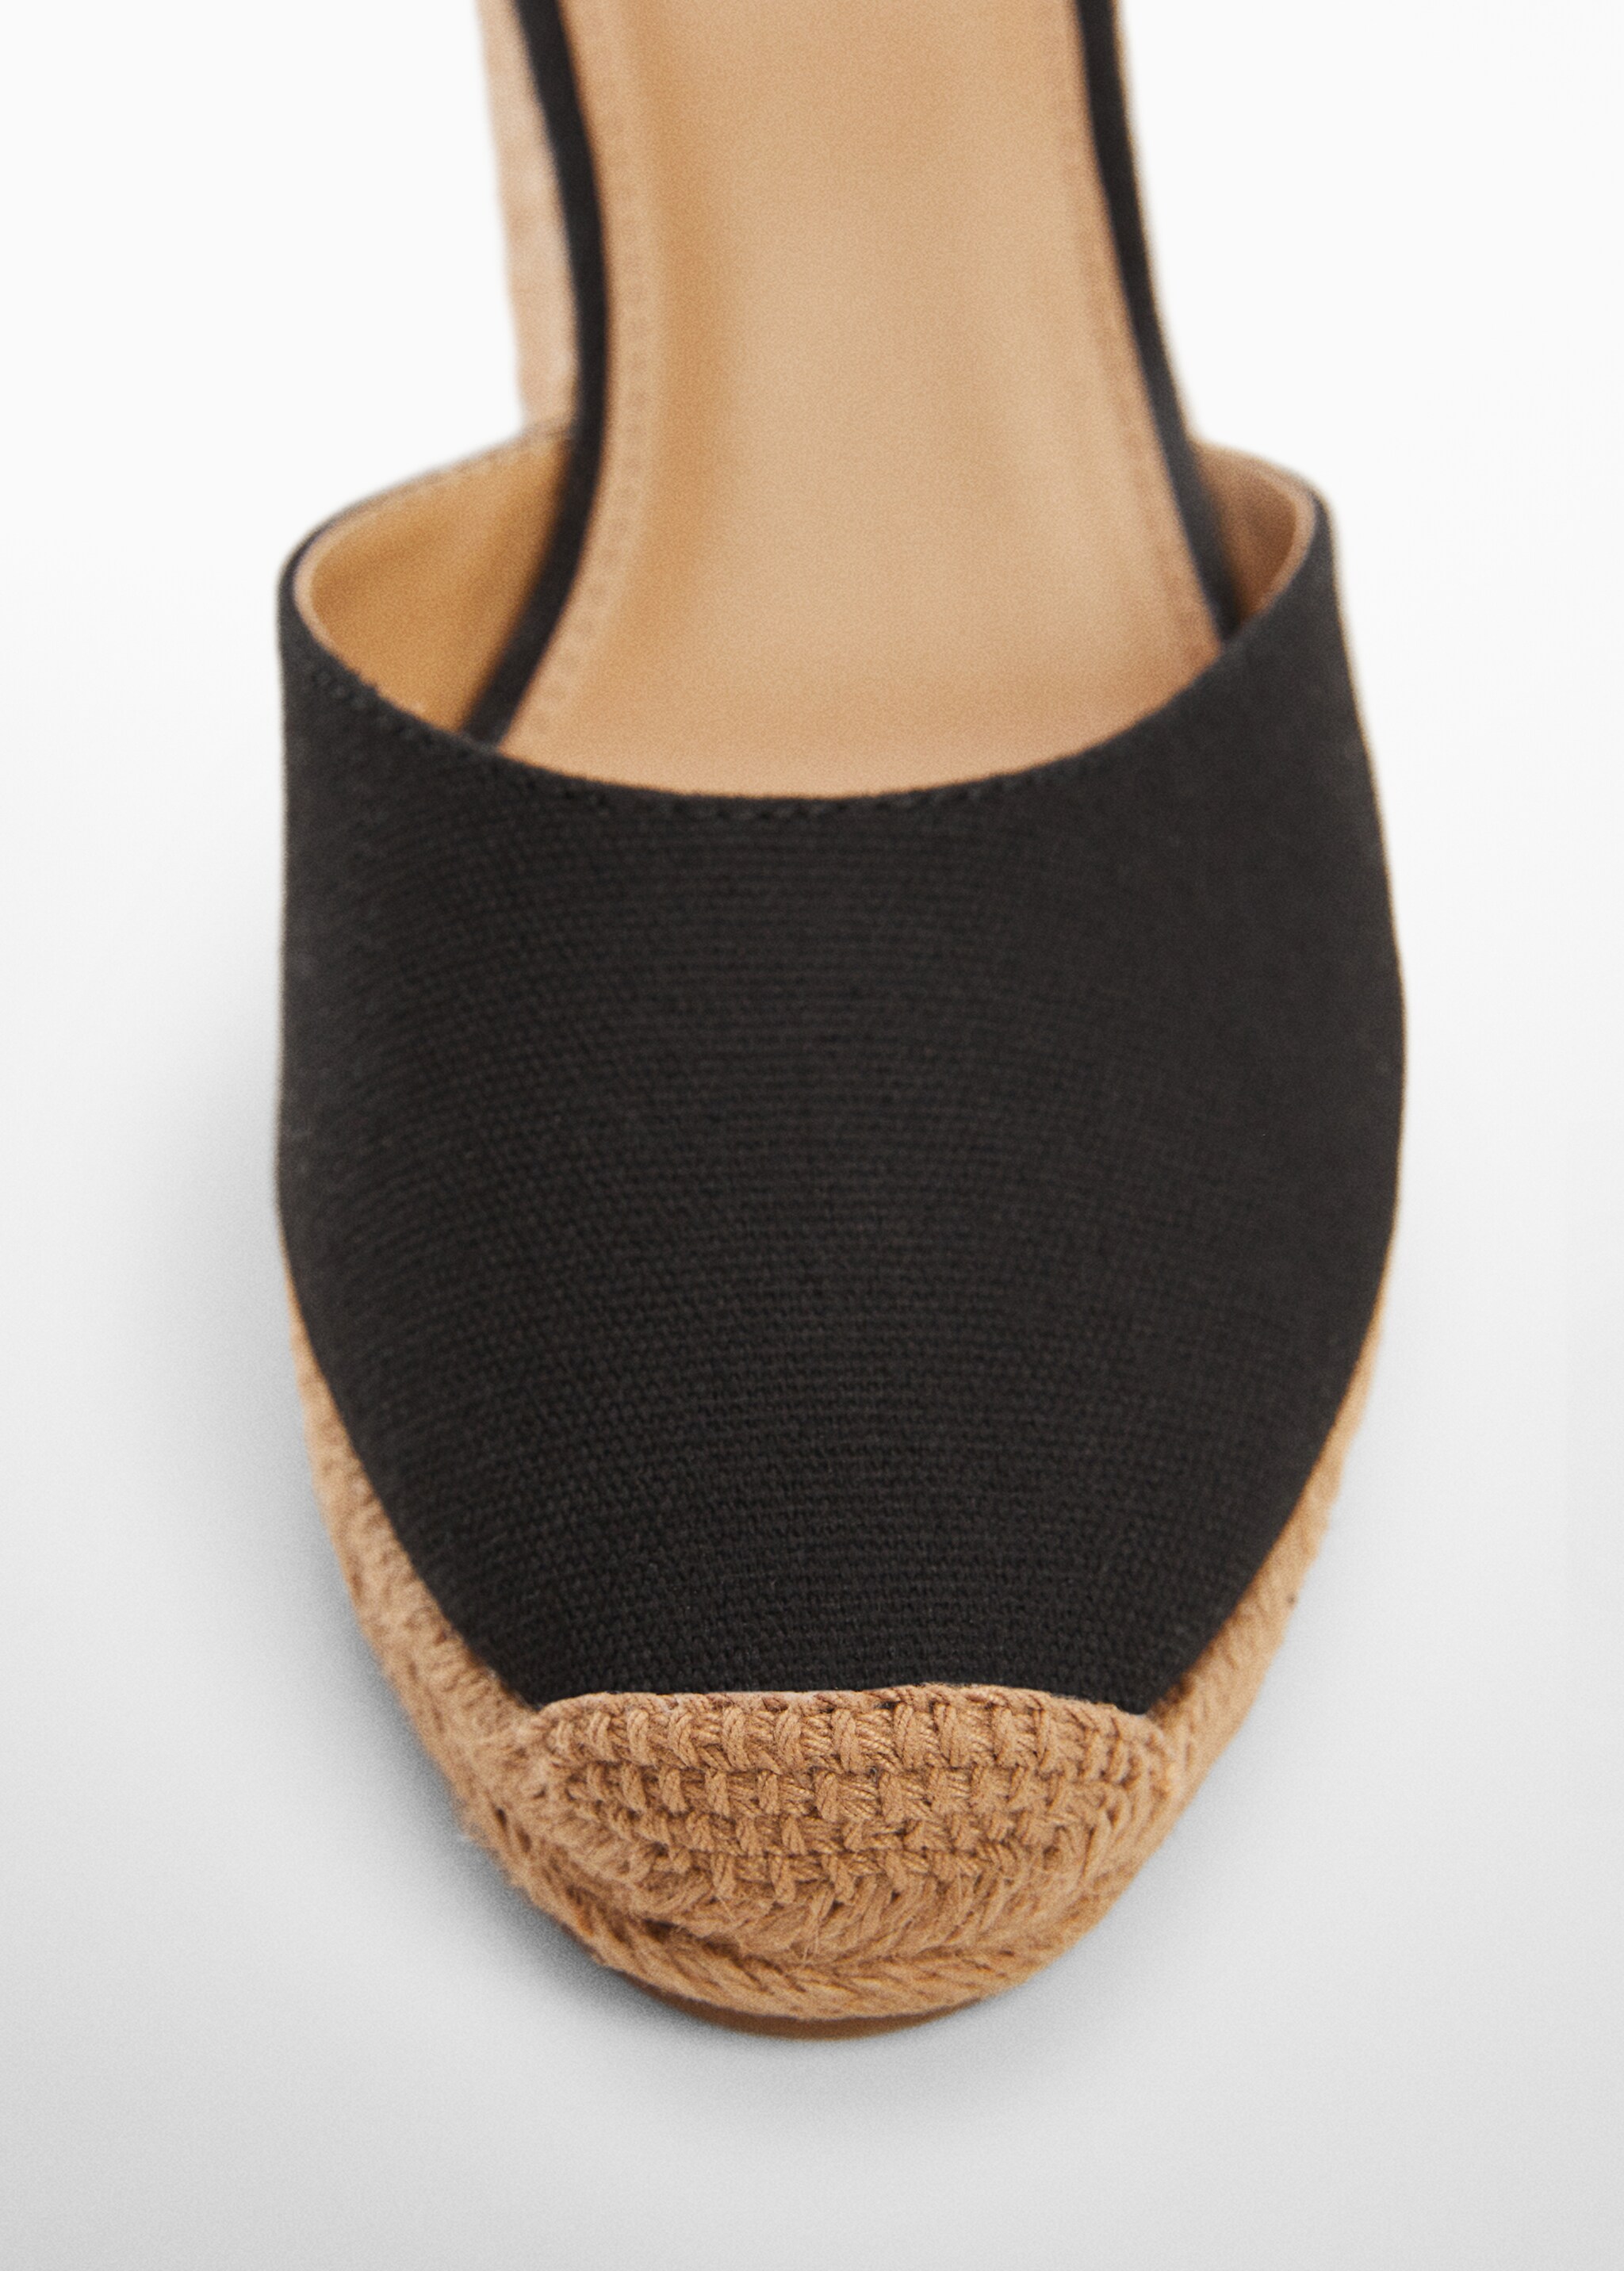 Lace-up espadrilles - Details of the article 2